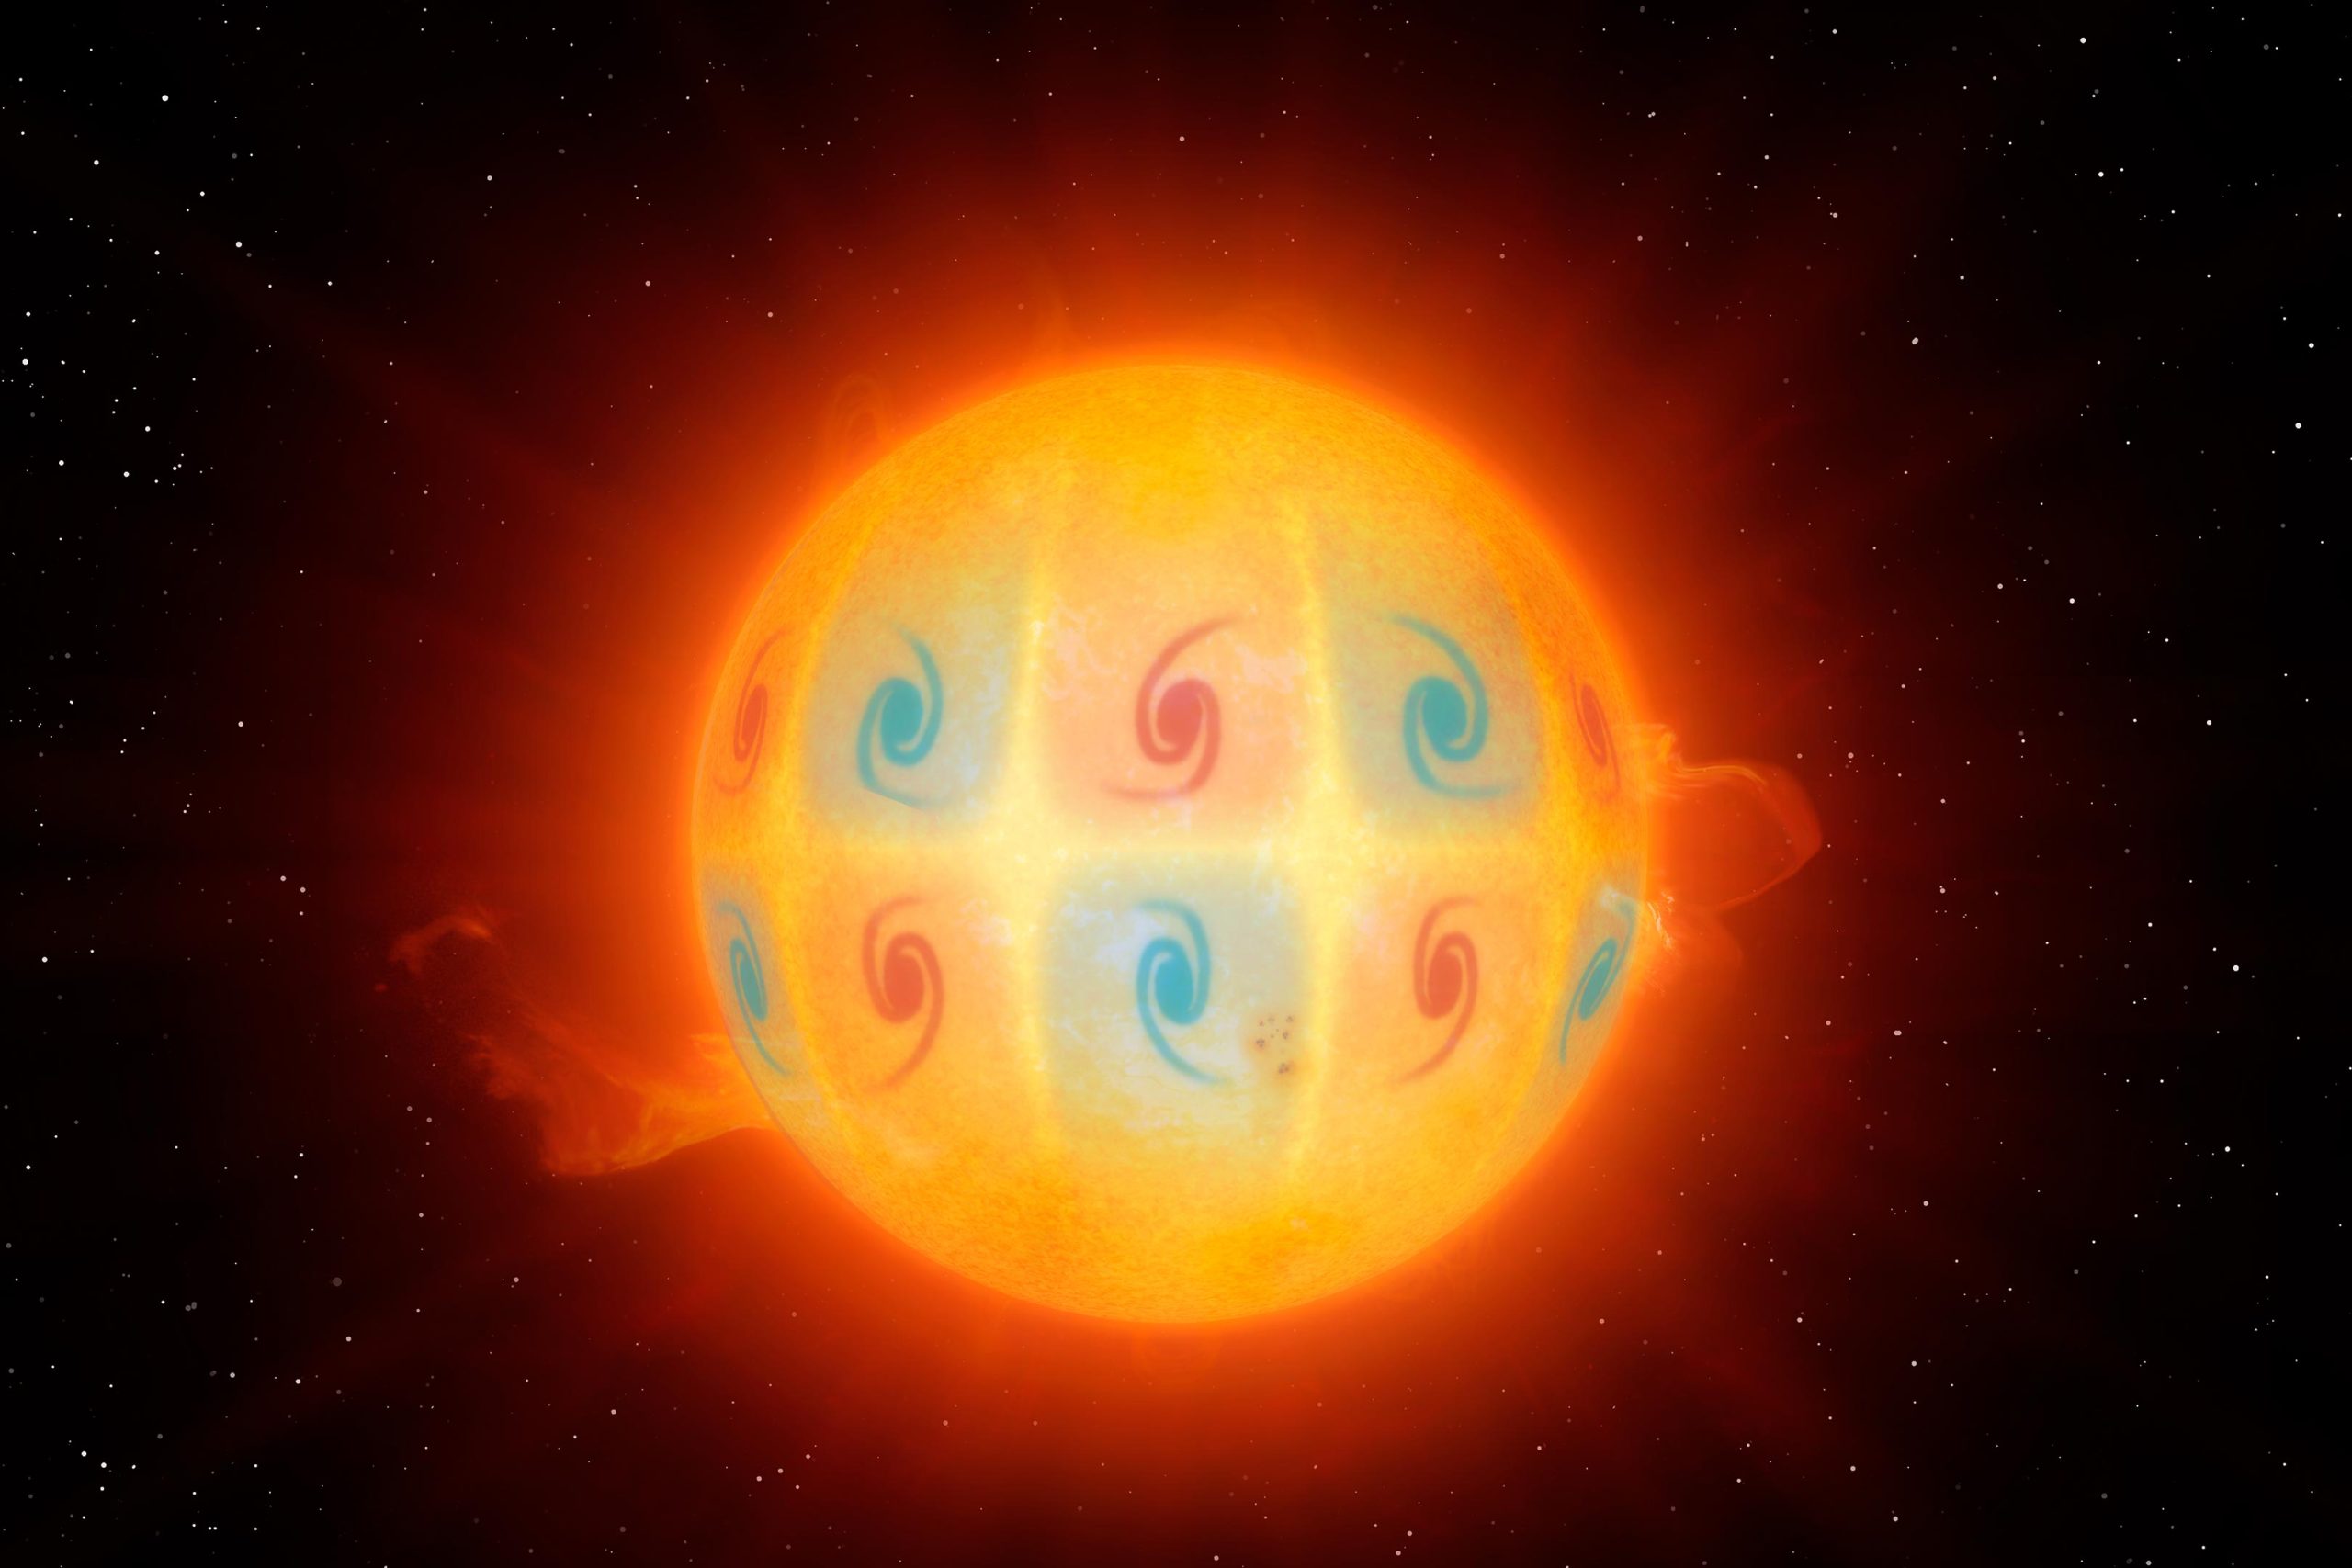 The discovery of mysterious circular waves in the sun - incredible speed that defies interpretation